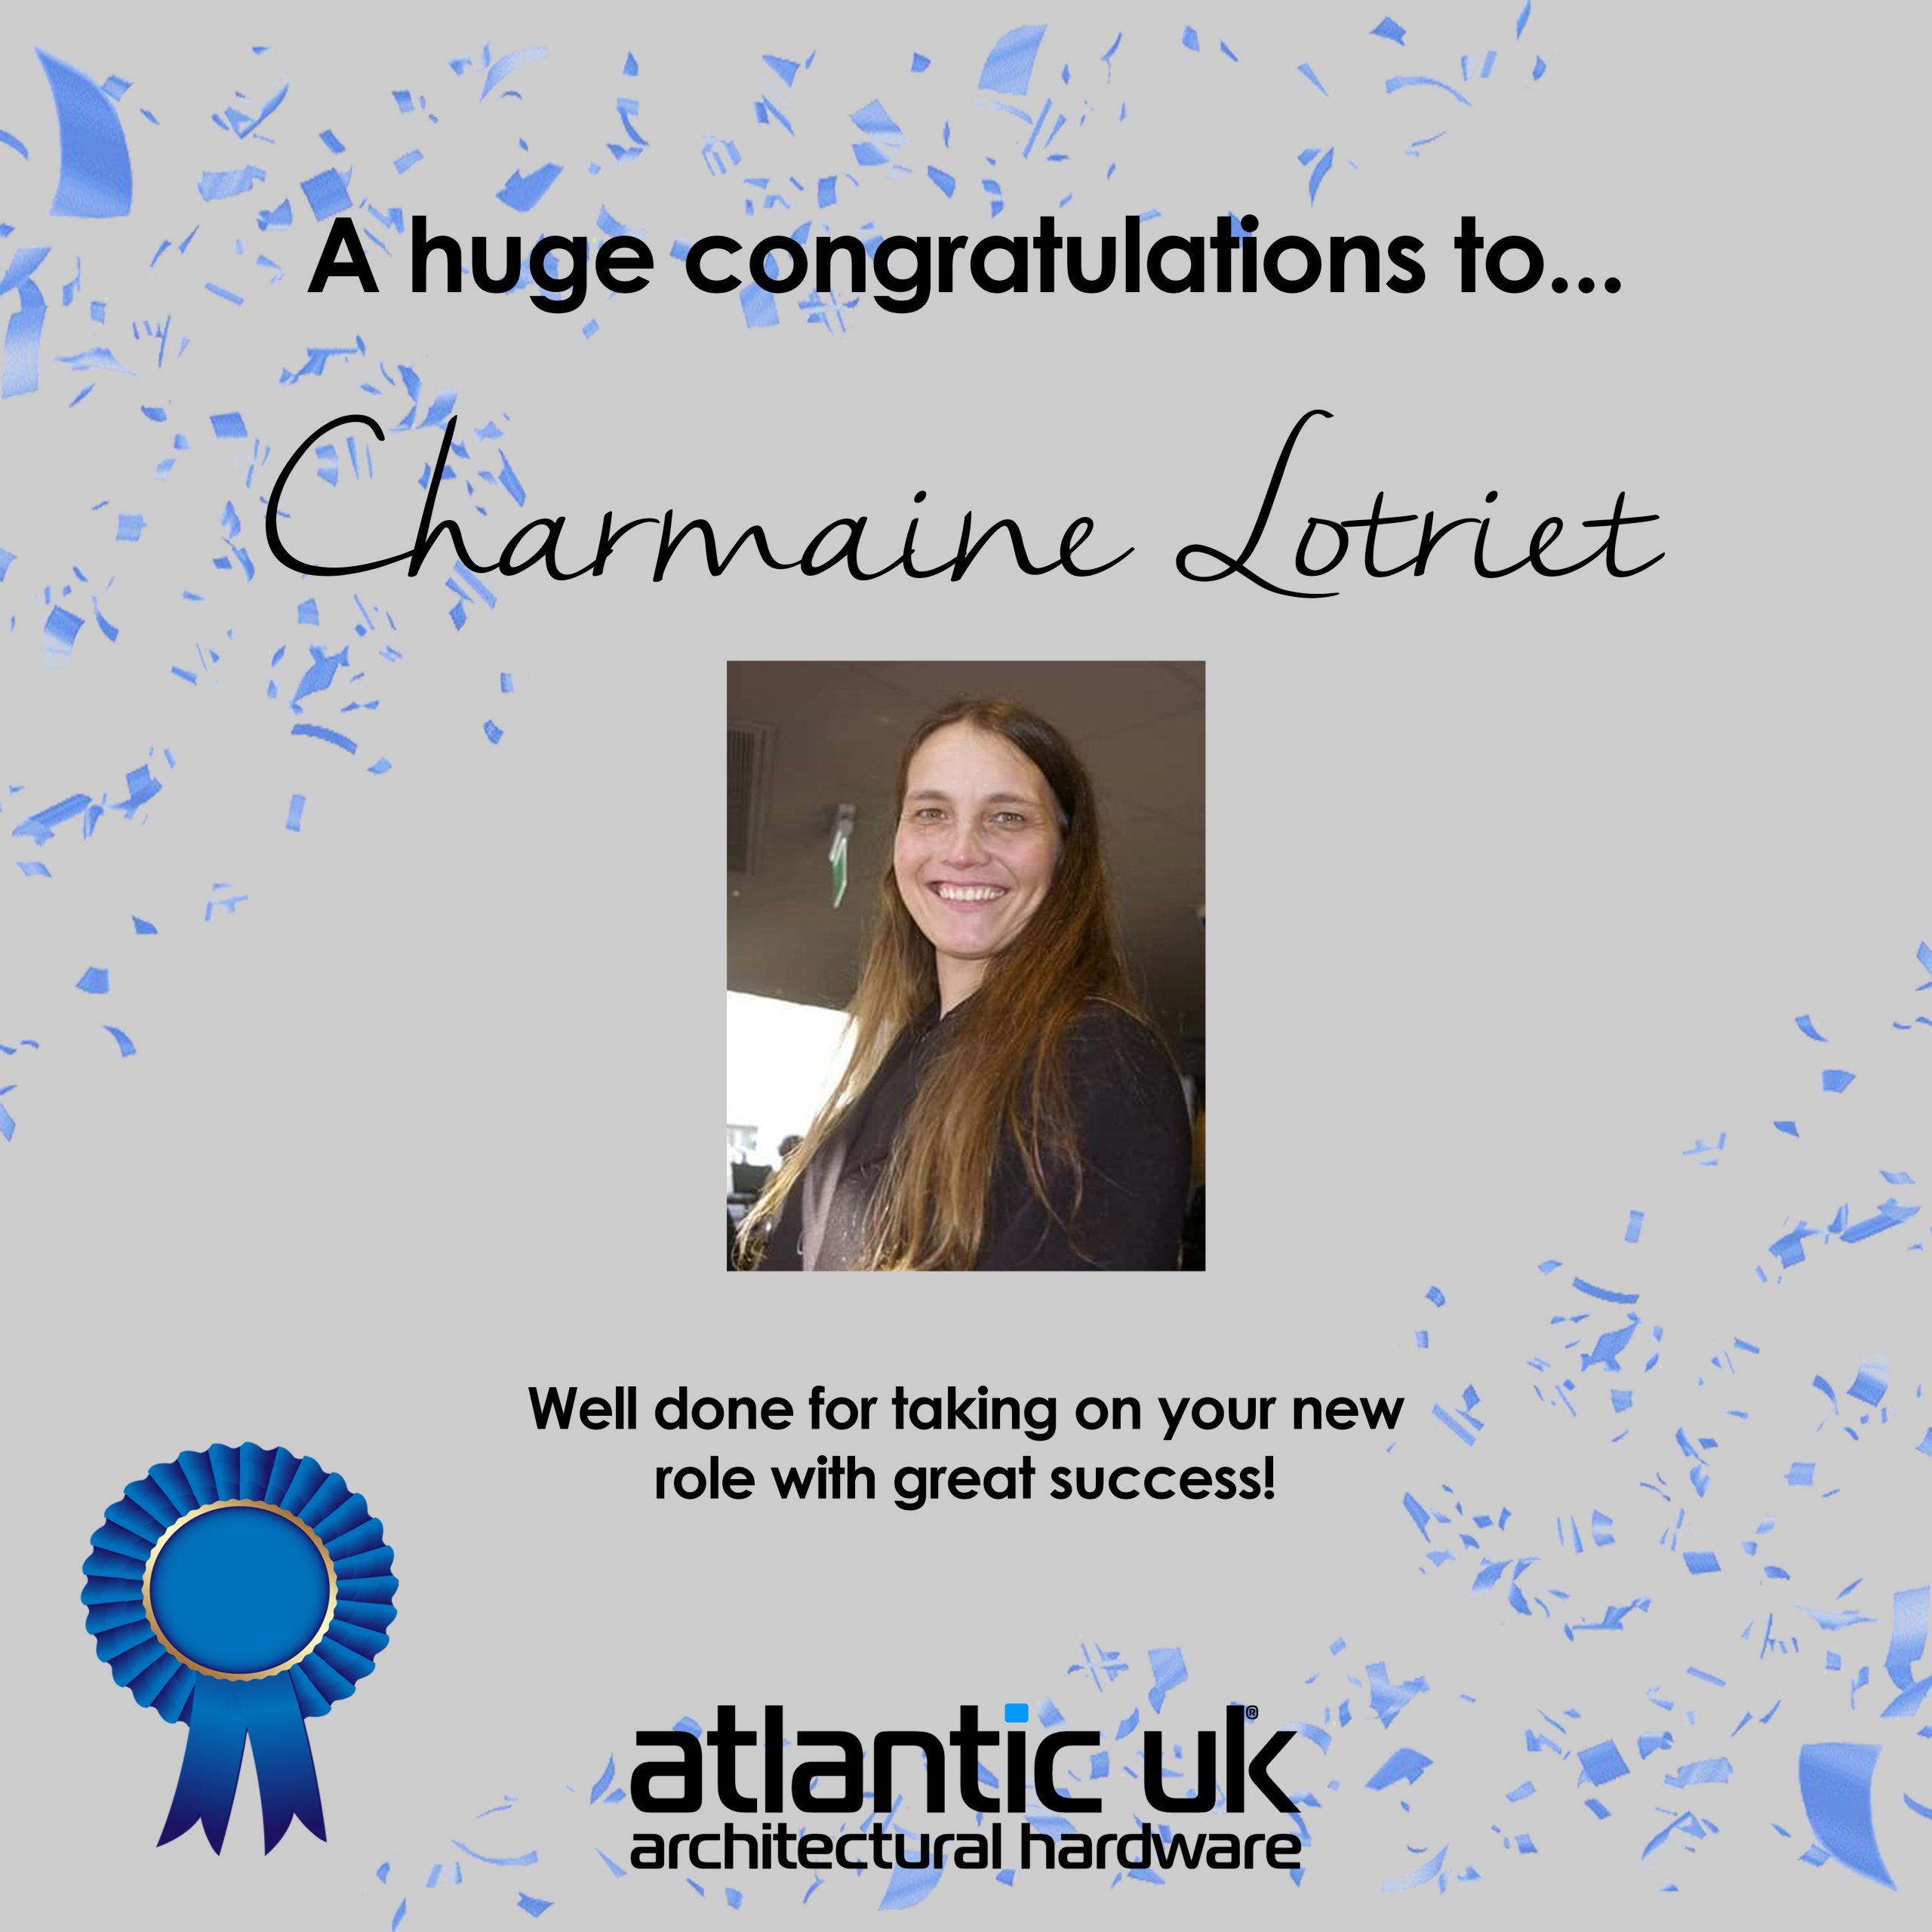 Congratulations Charmaine!  Employee of the Month for February!